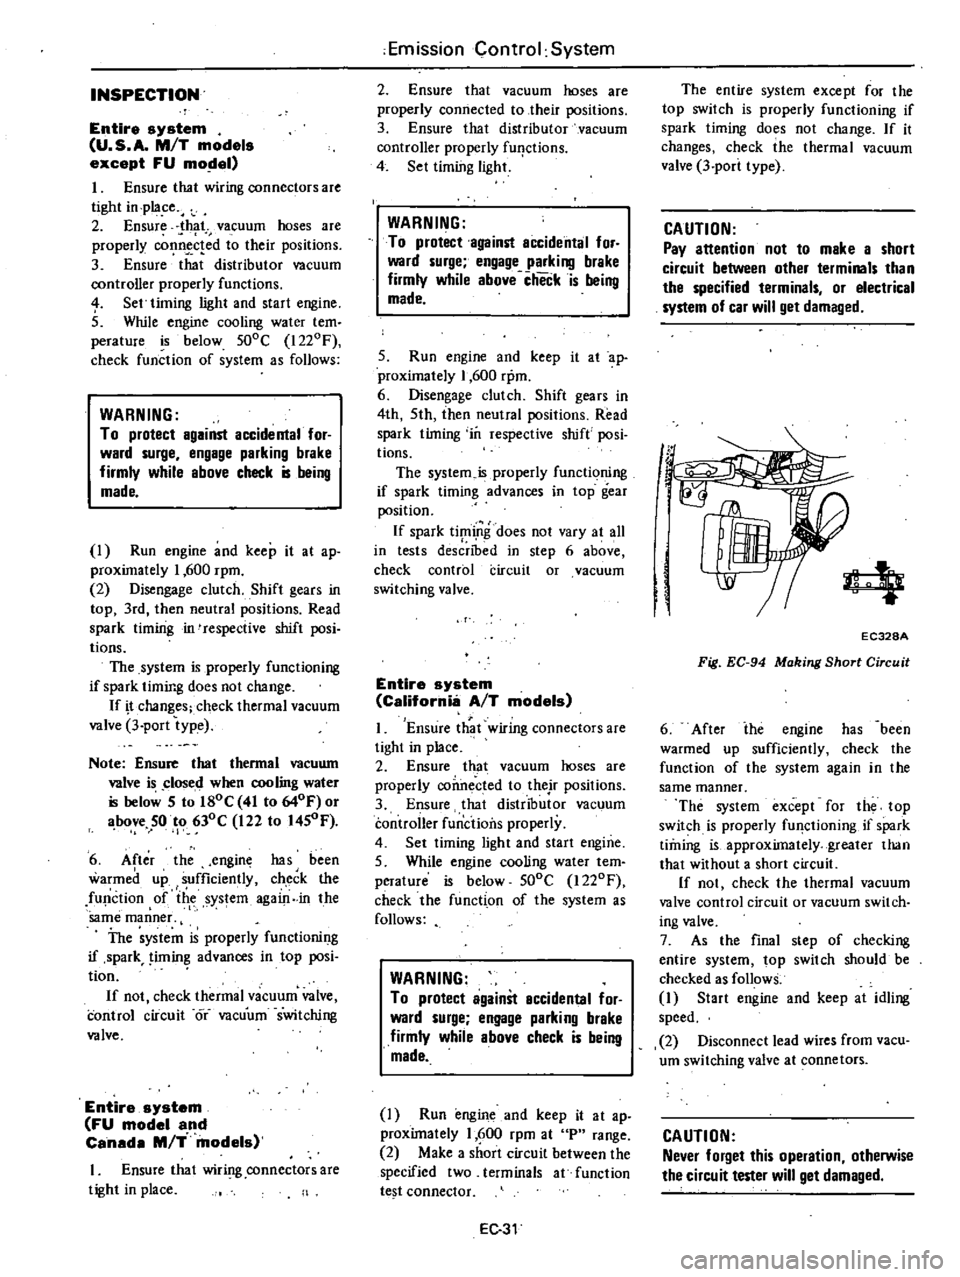 DATSUN 210 1979 User Guide 
INSPECTION

Entire

system

U 
S 
A 
MIT

models

except 
FU 
mo

el

1 
Ensure 
that

wiring 
connectors 
are

tight 
in

pla 
ce

2 
Ensure 
that

vacuum 
hoses

are

properly

cof
1o 
c 
ed 
to

t